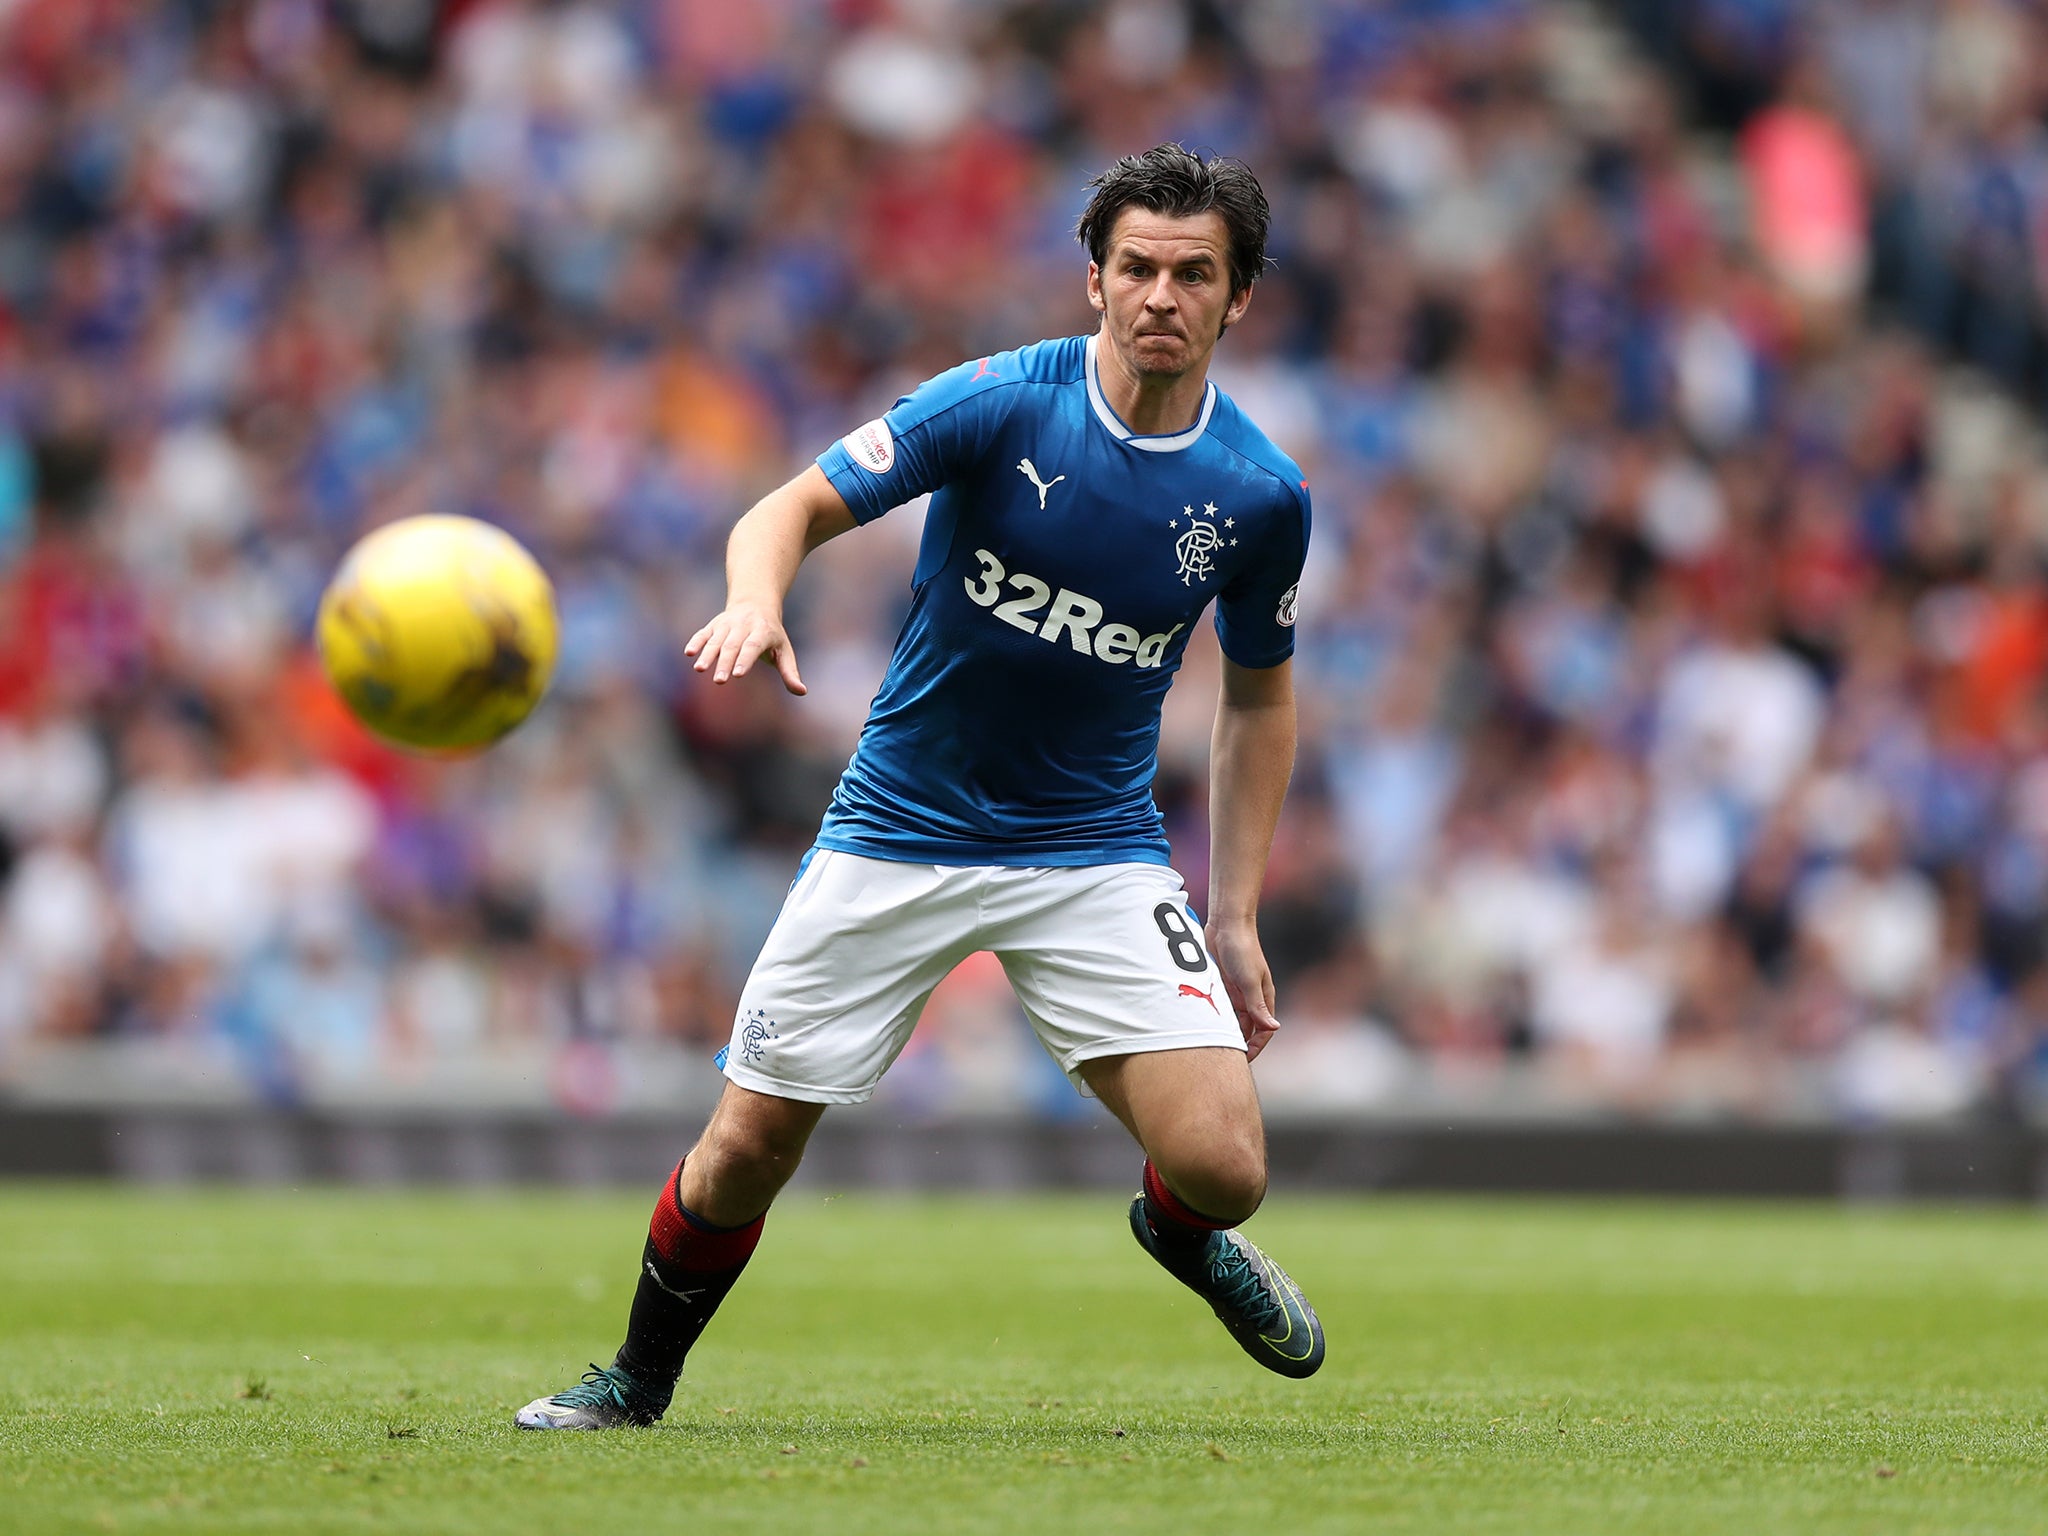 Joey Barton has been exiled from the squad until Monday